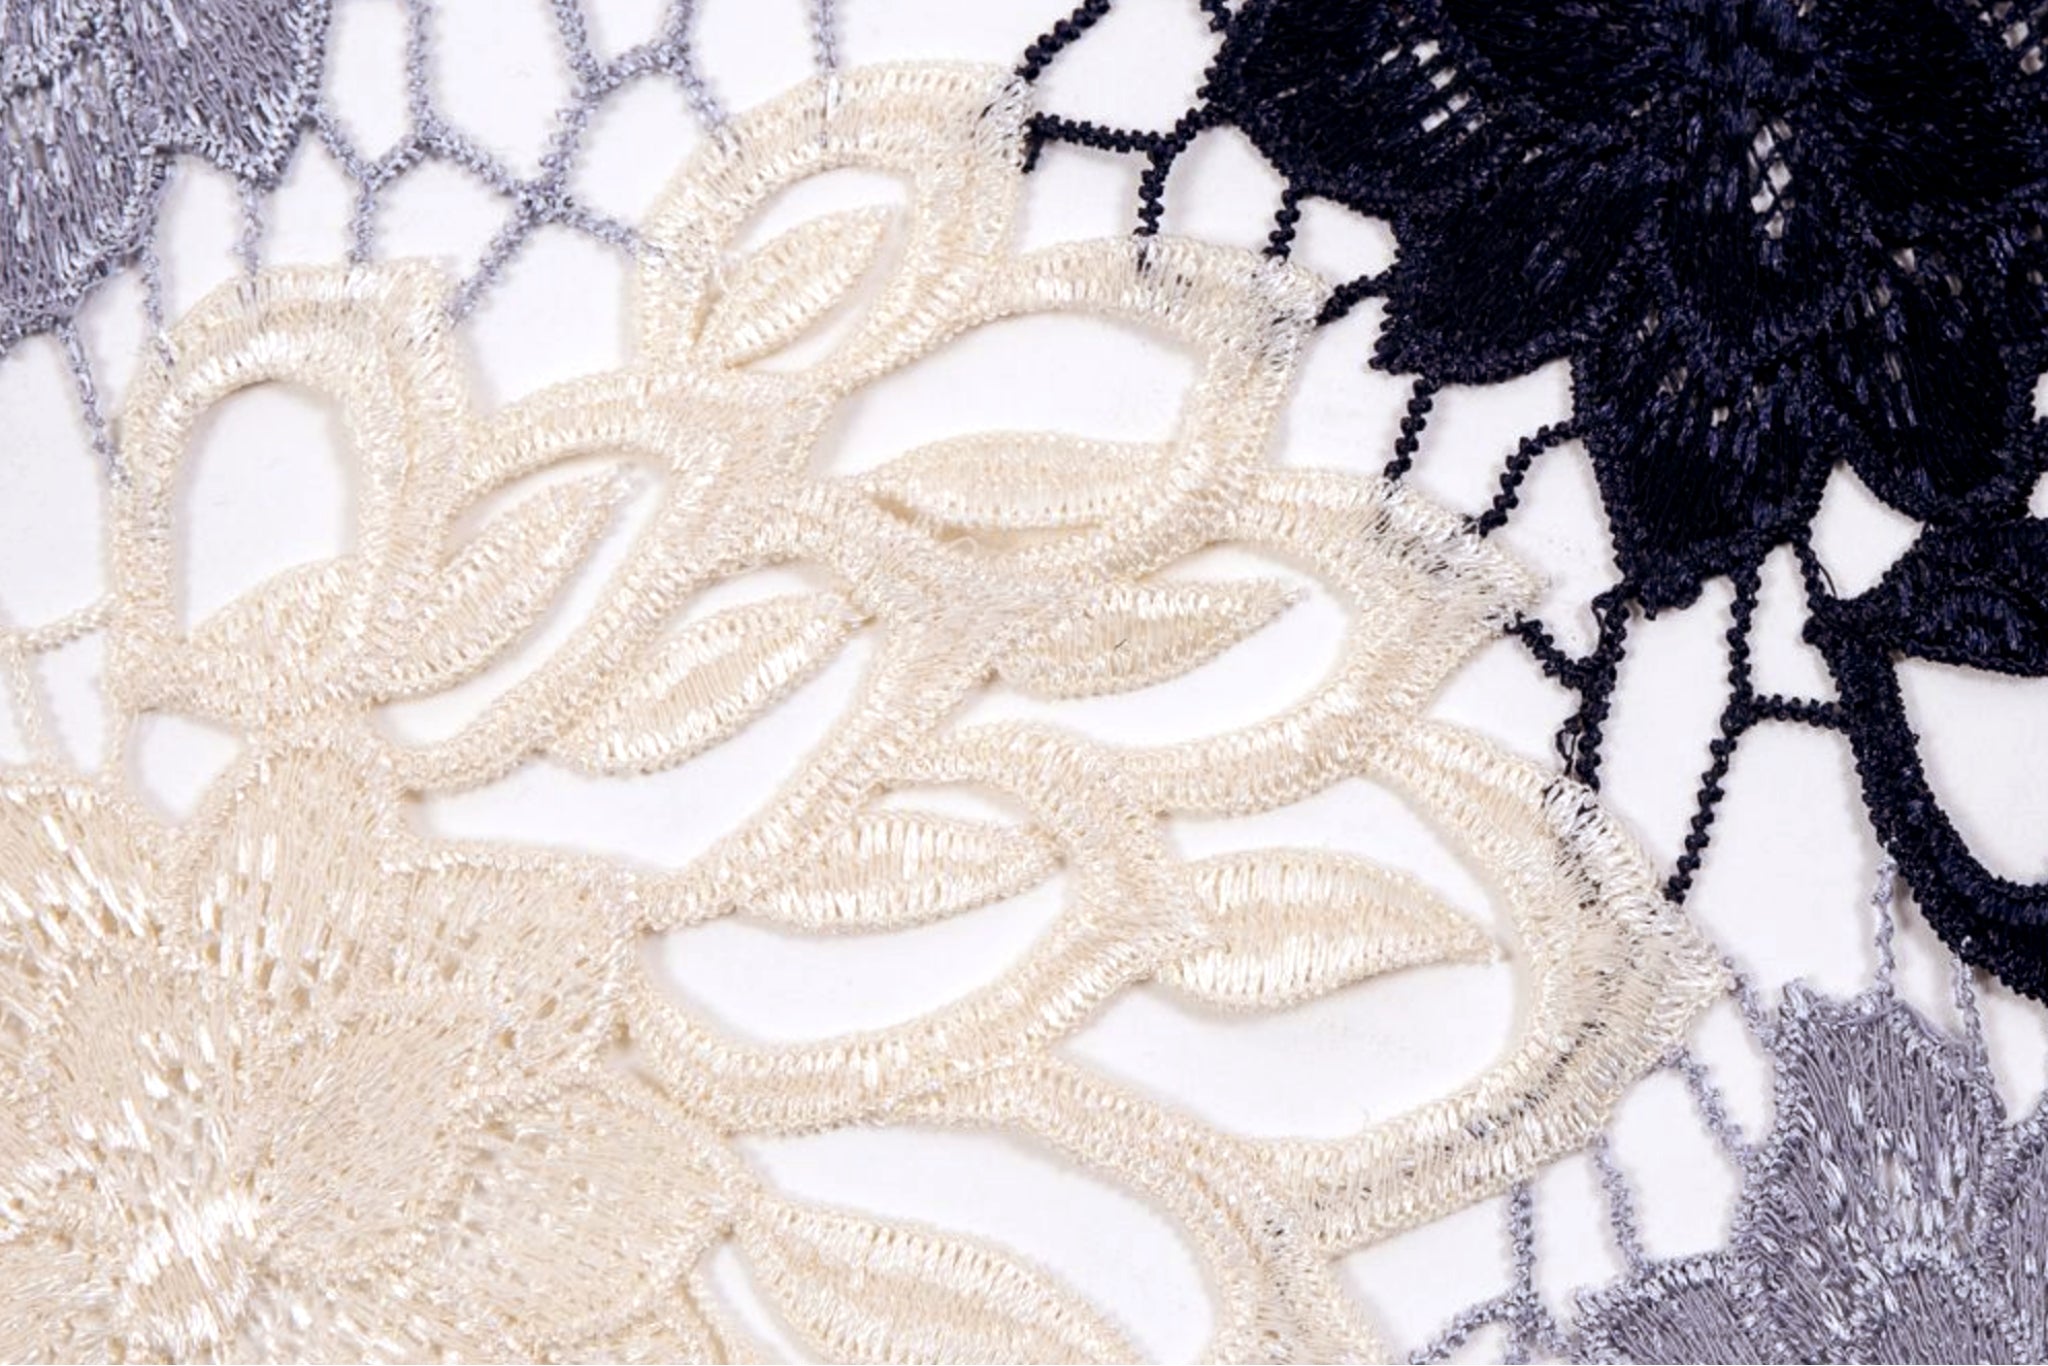 How to Shop for Lace Fabric